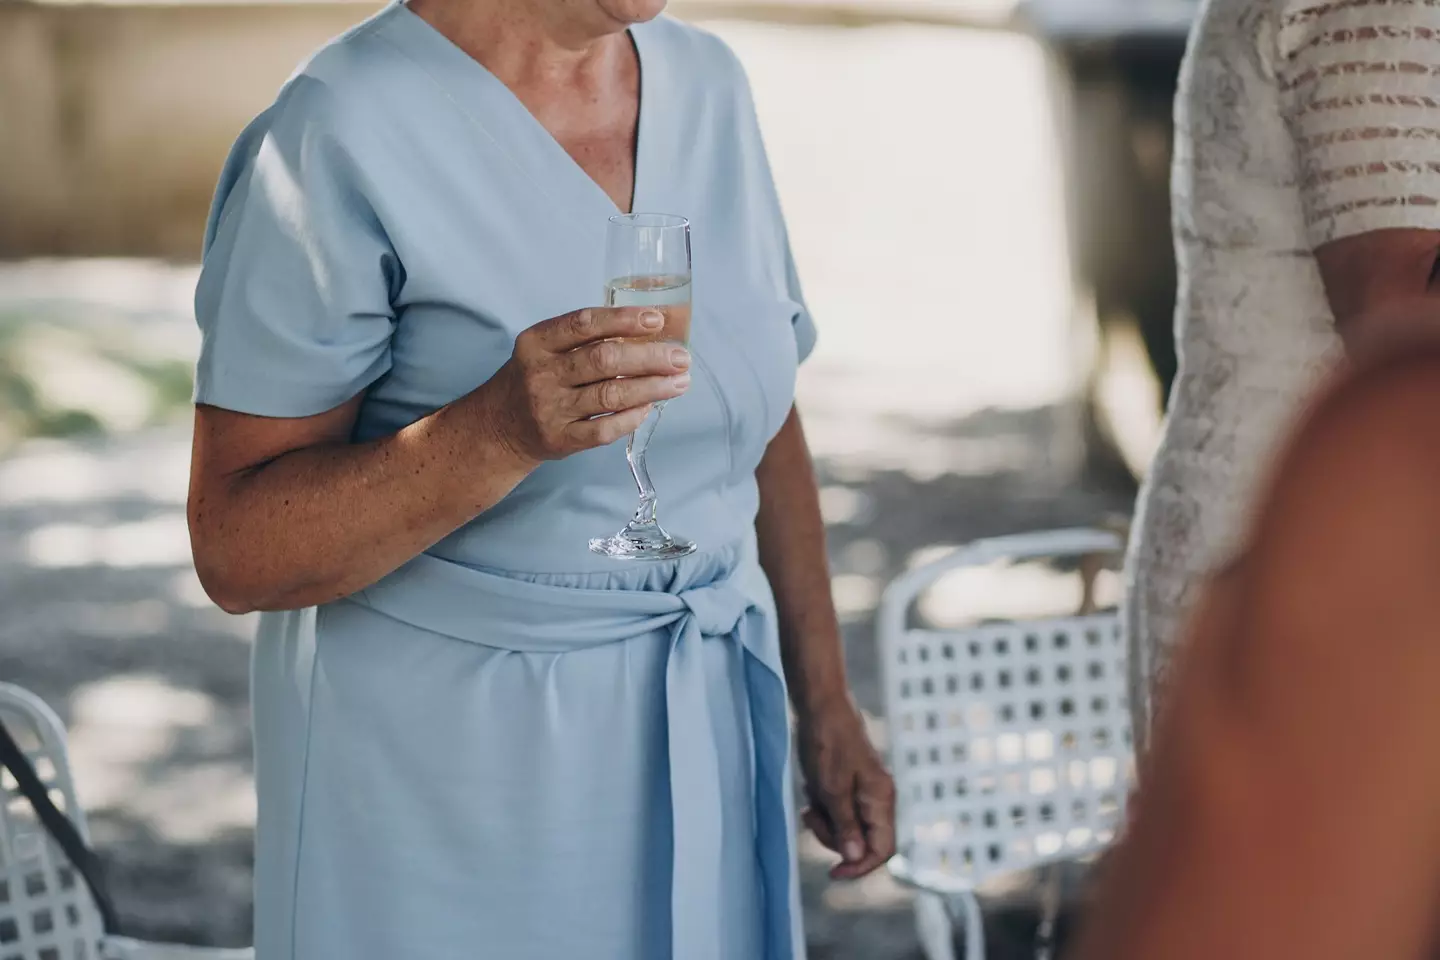 The bride asked for advice after struggling with her mother-in-law (